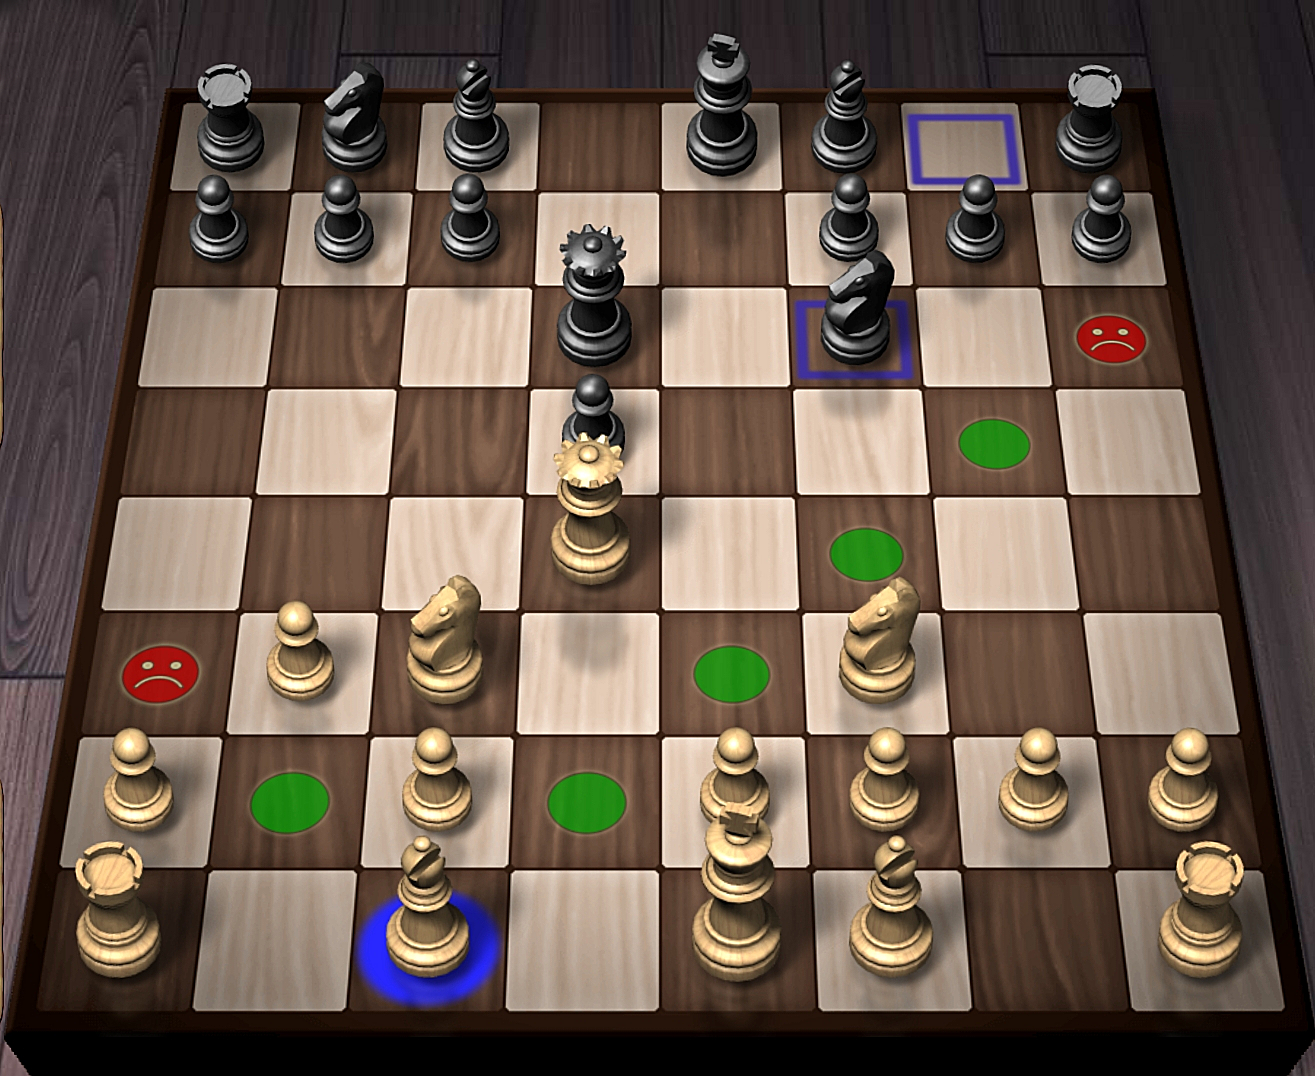 Chess Openings Pró-Master APK (Android Game) - Free Download